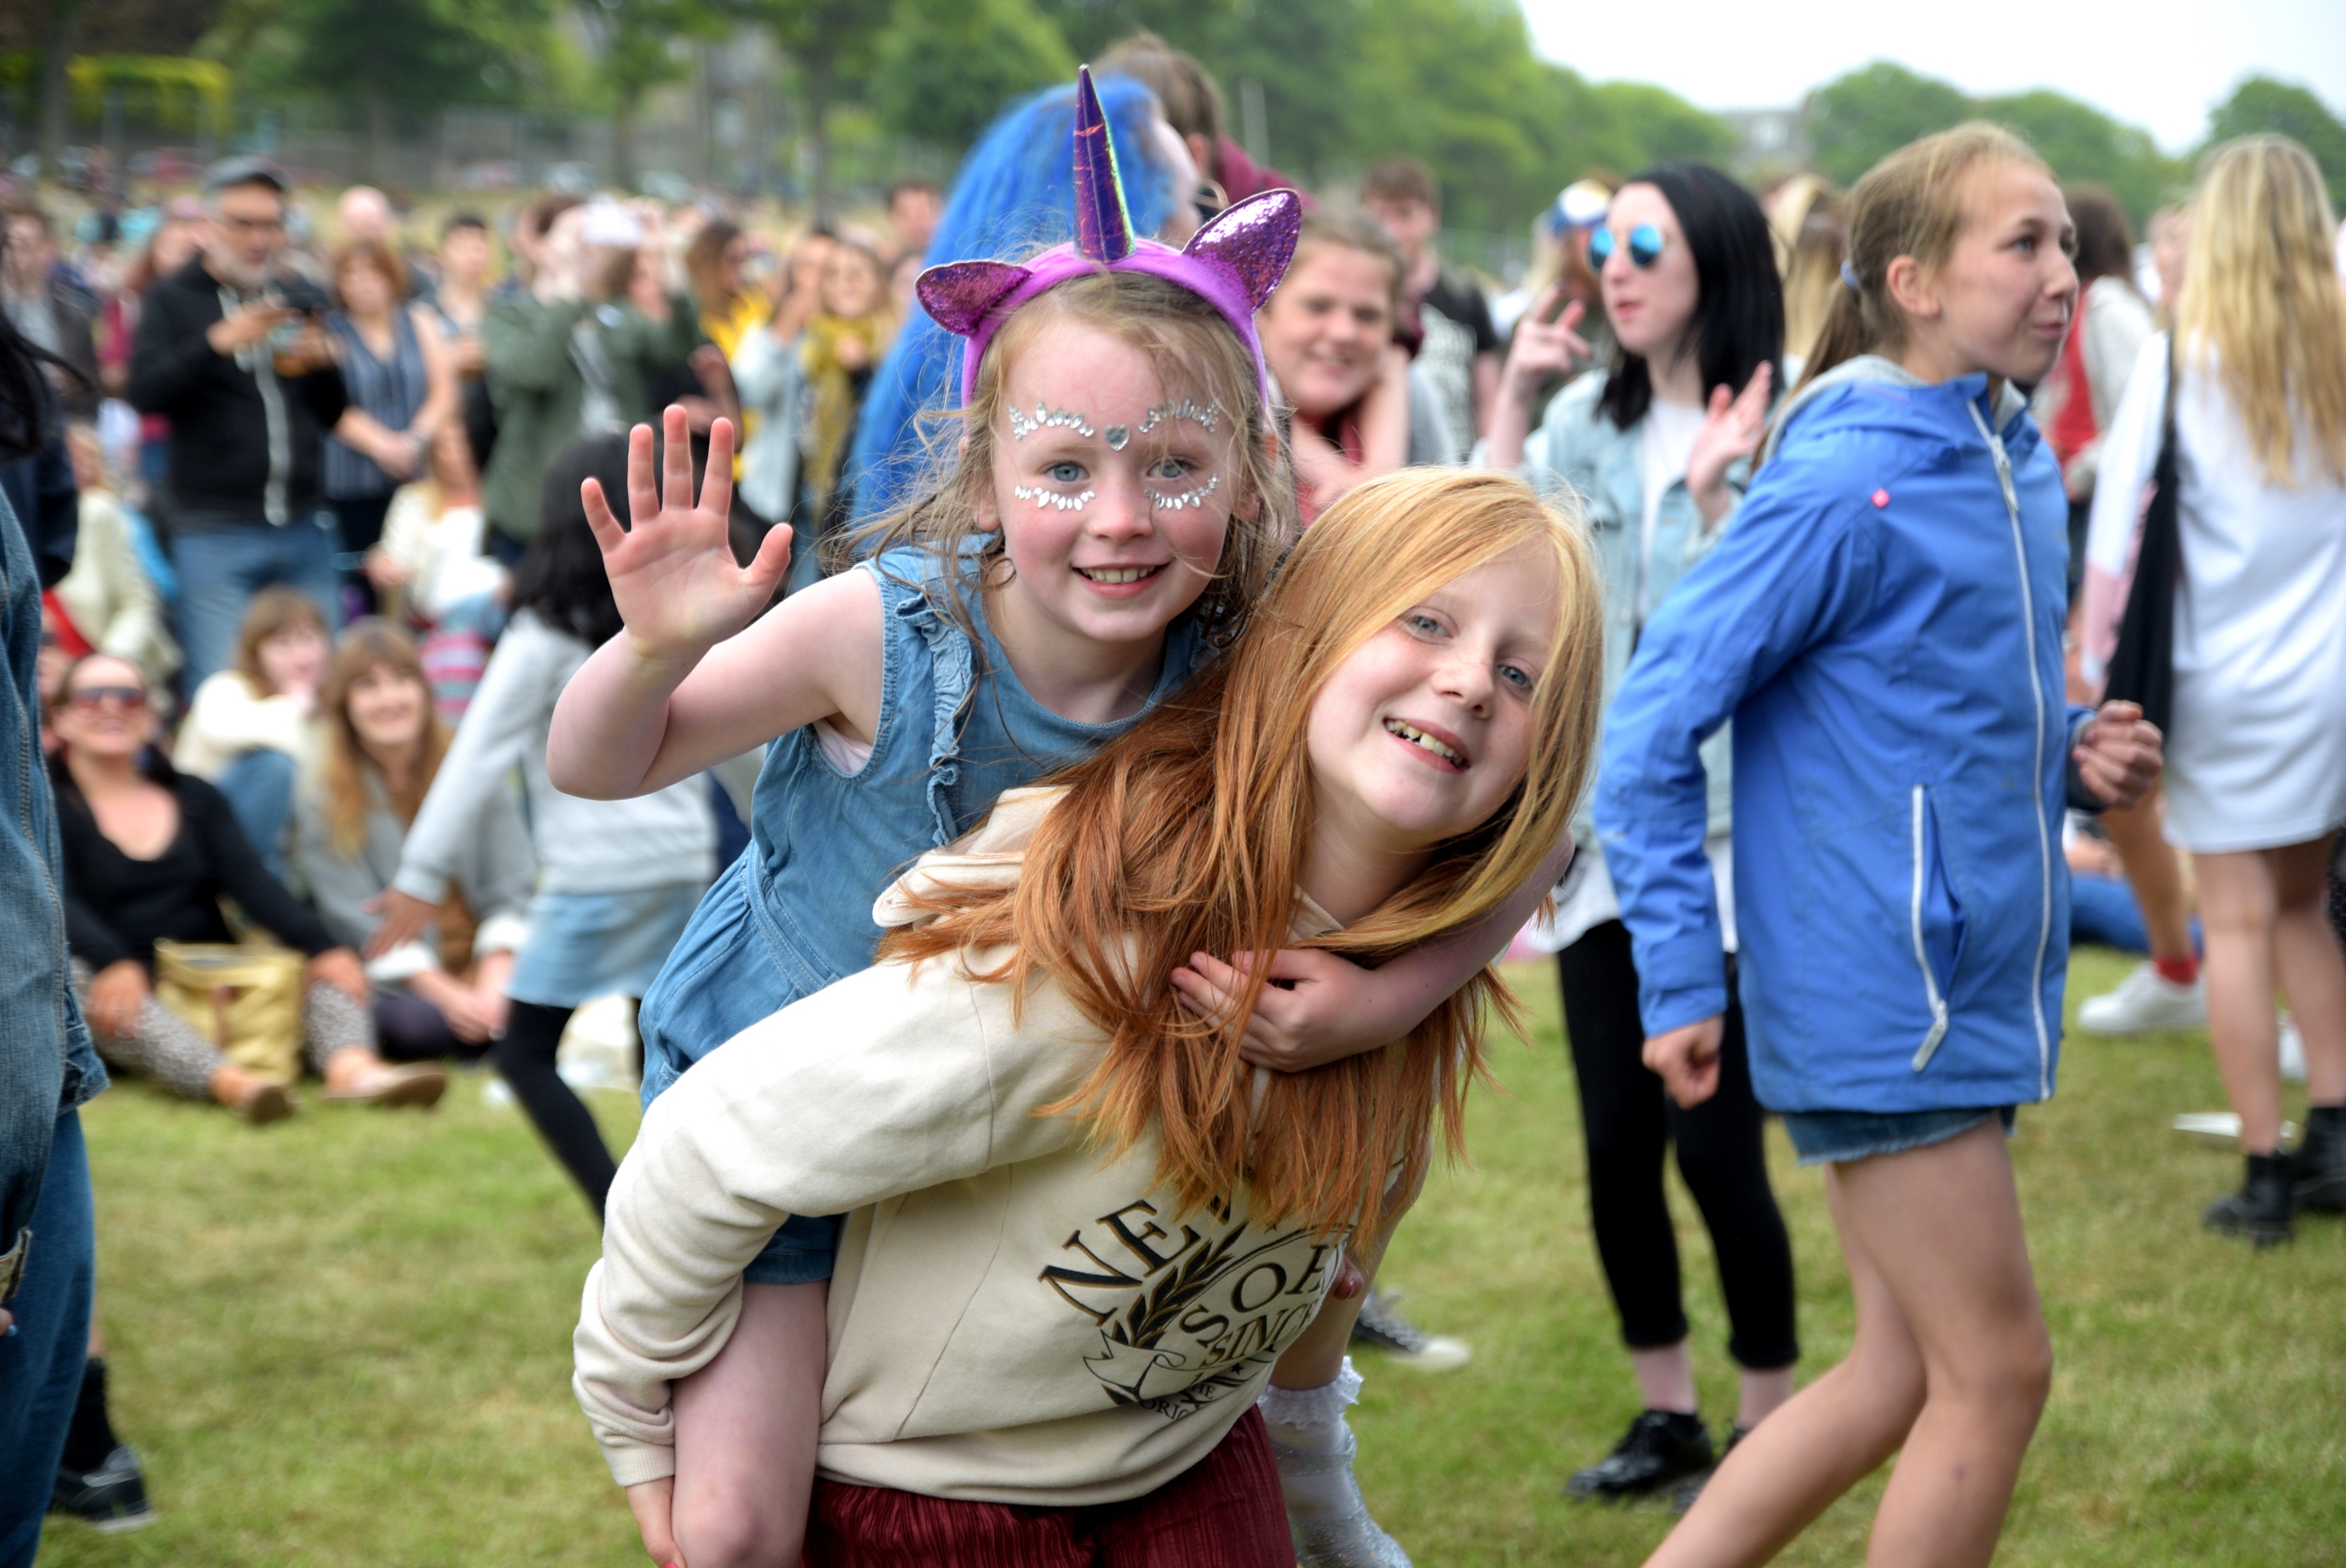 Kids' activities, football coaching and a wealth of musical talent are all in the mix for this year's Westfest.